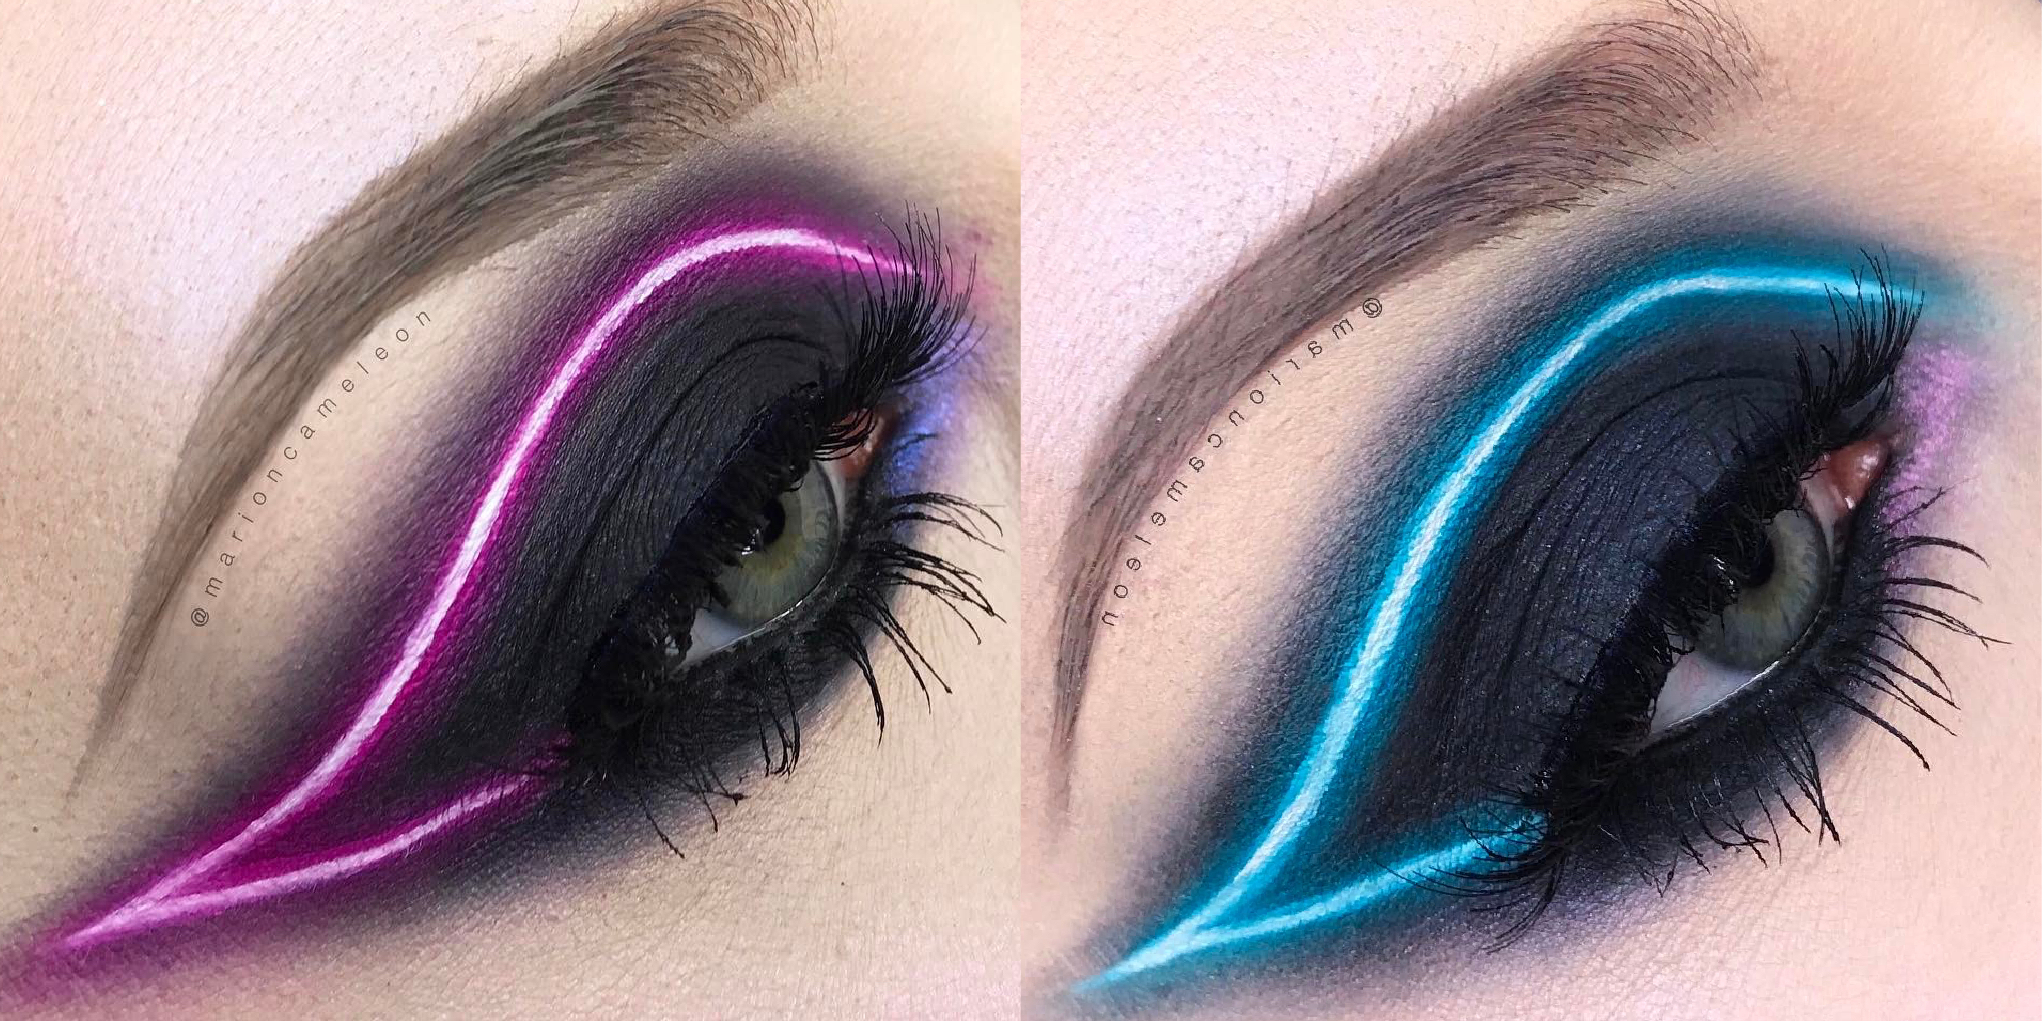 Pink And White Eye Makeup You Need To Try The New Neon Light Makeup Trend